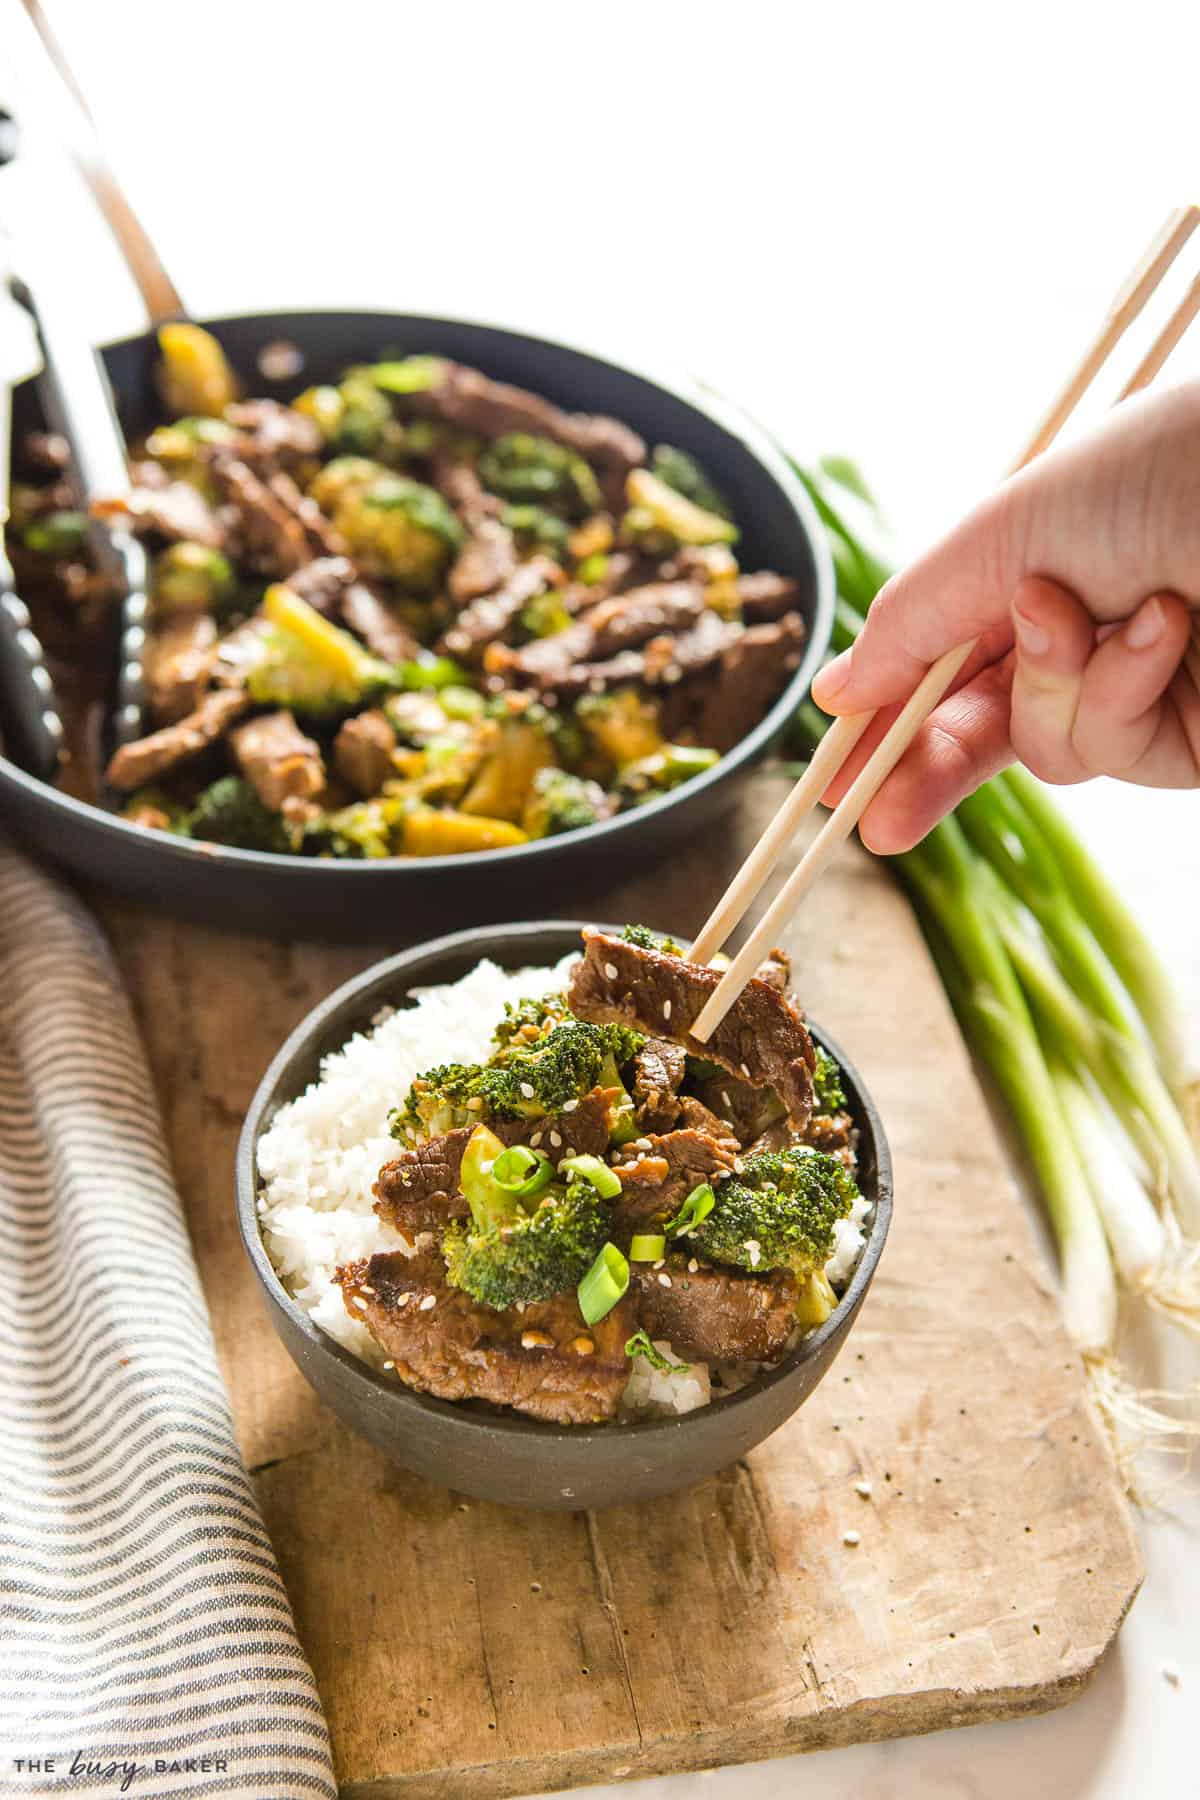 hand using chopsticks holding a piece of beef stir fry with broccoli